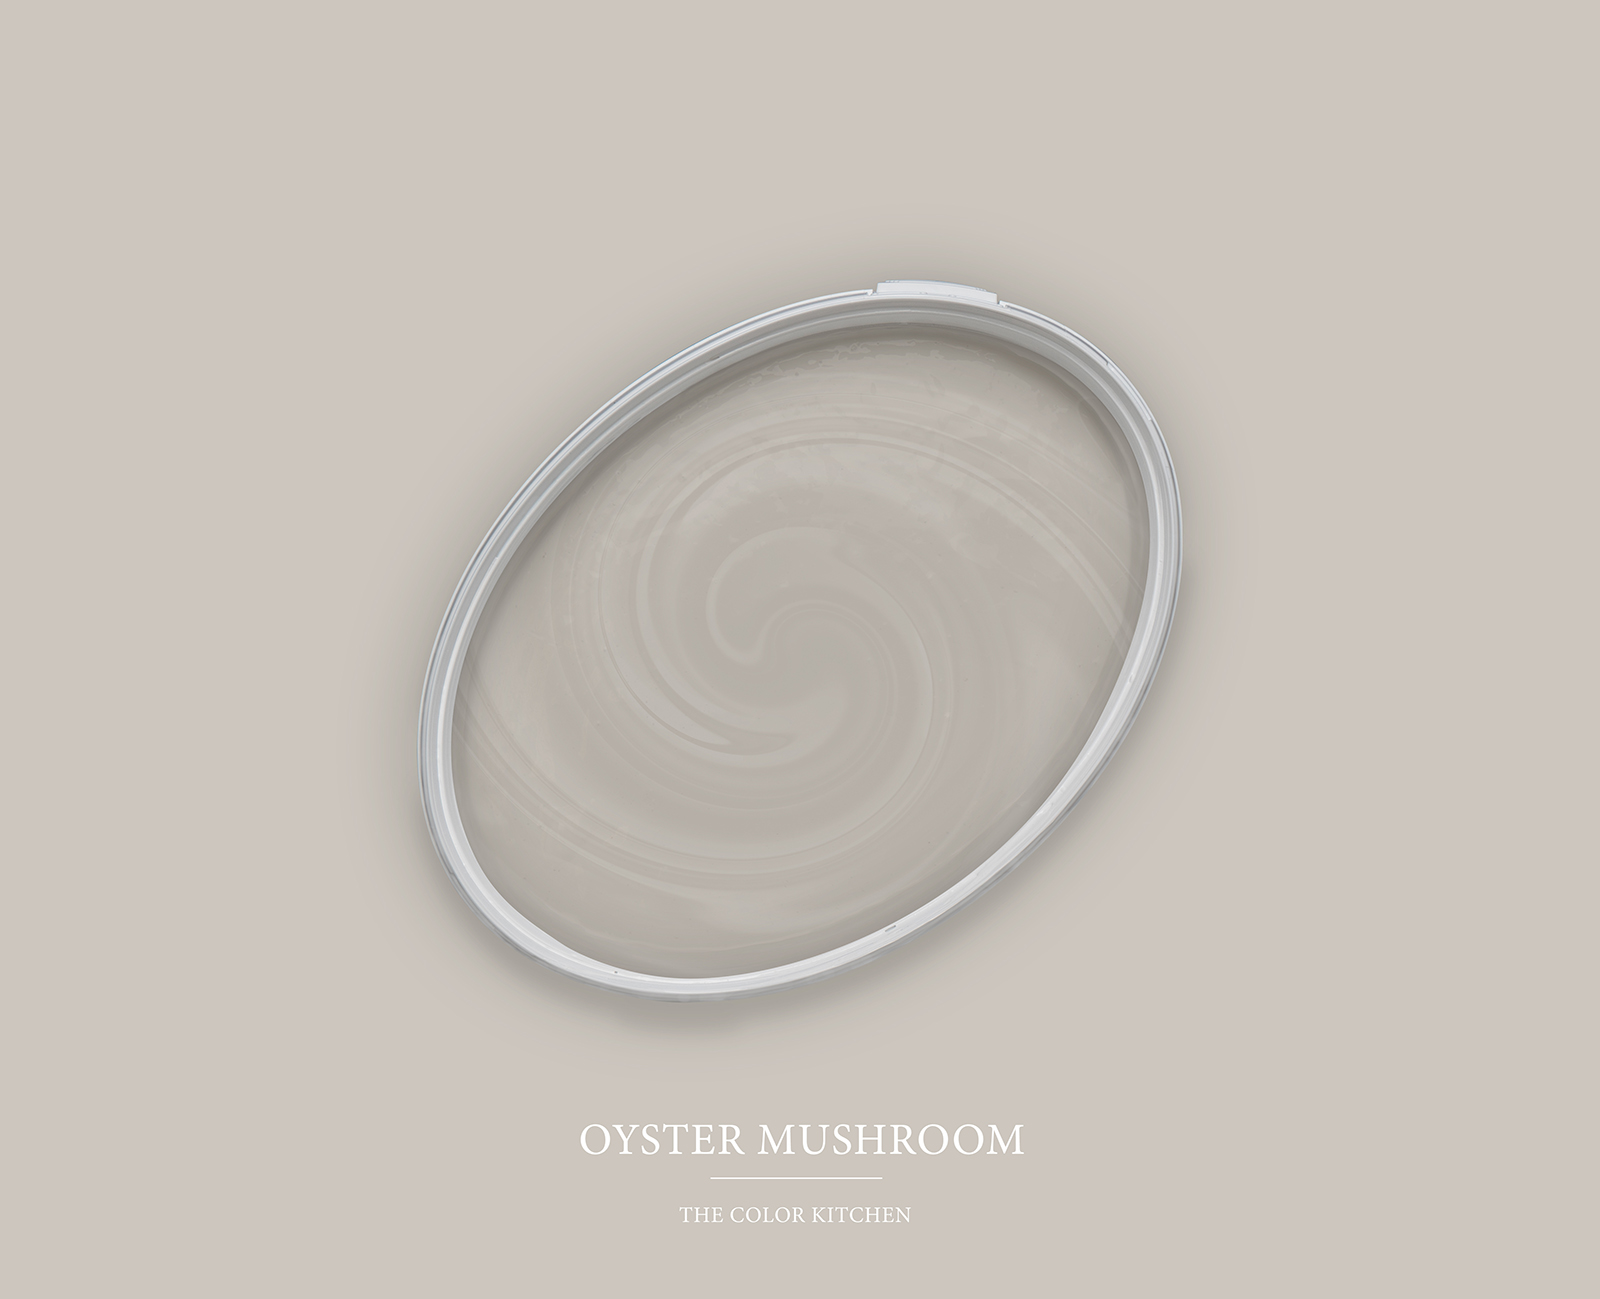 Wall Paint TCK1017 »Oyster Mushroom« in light taupe – 5.0 litre
